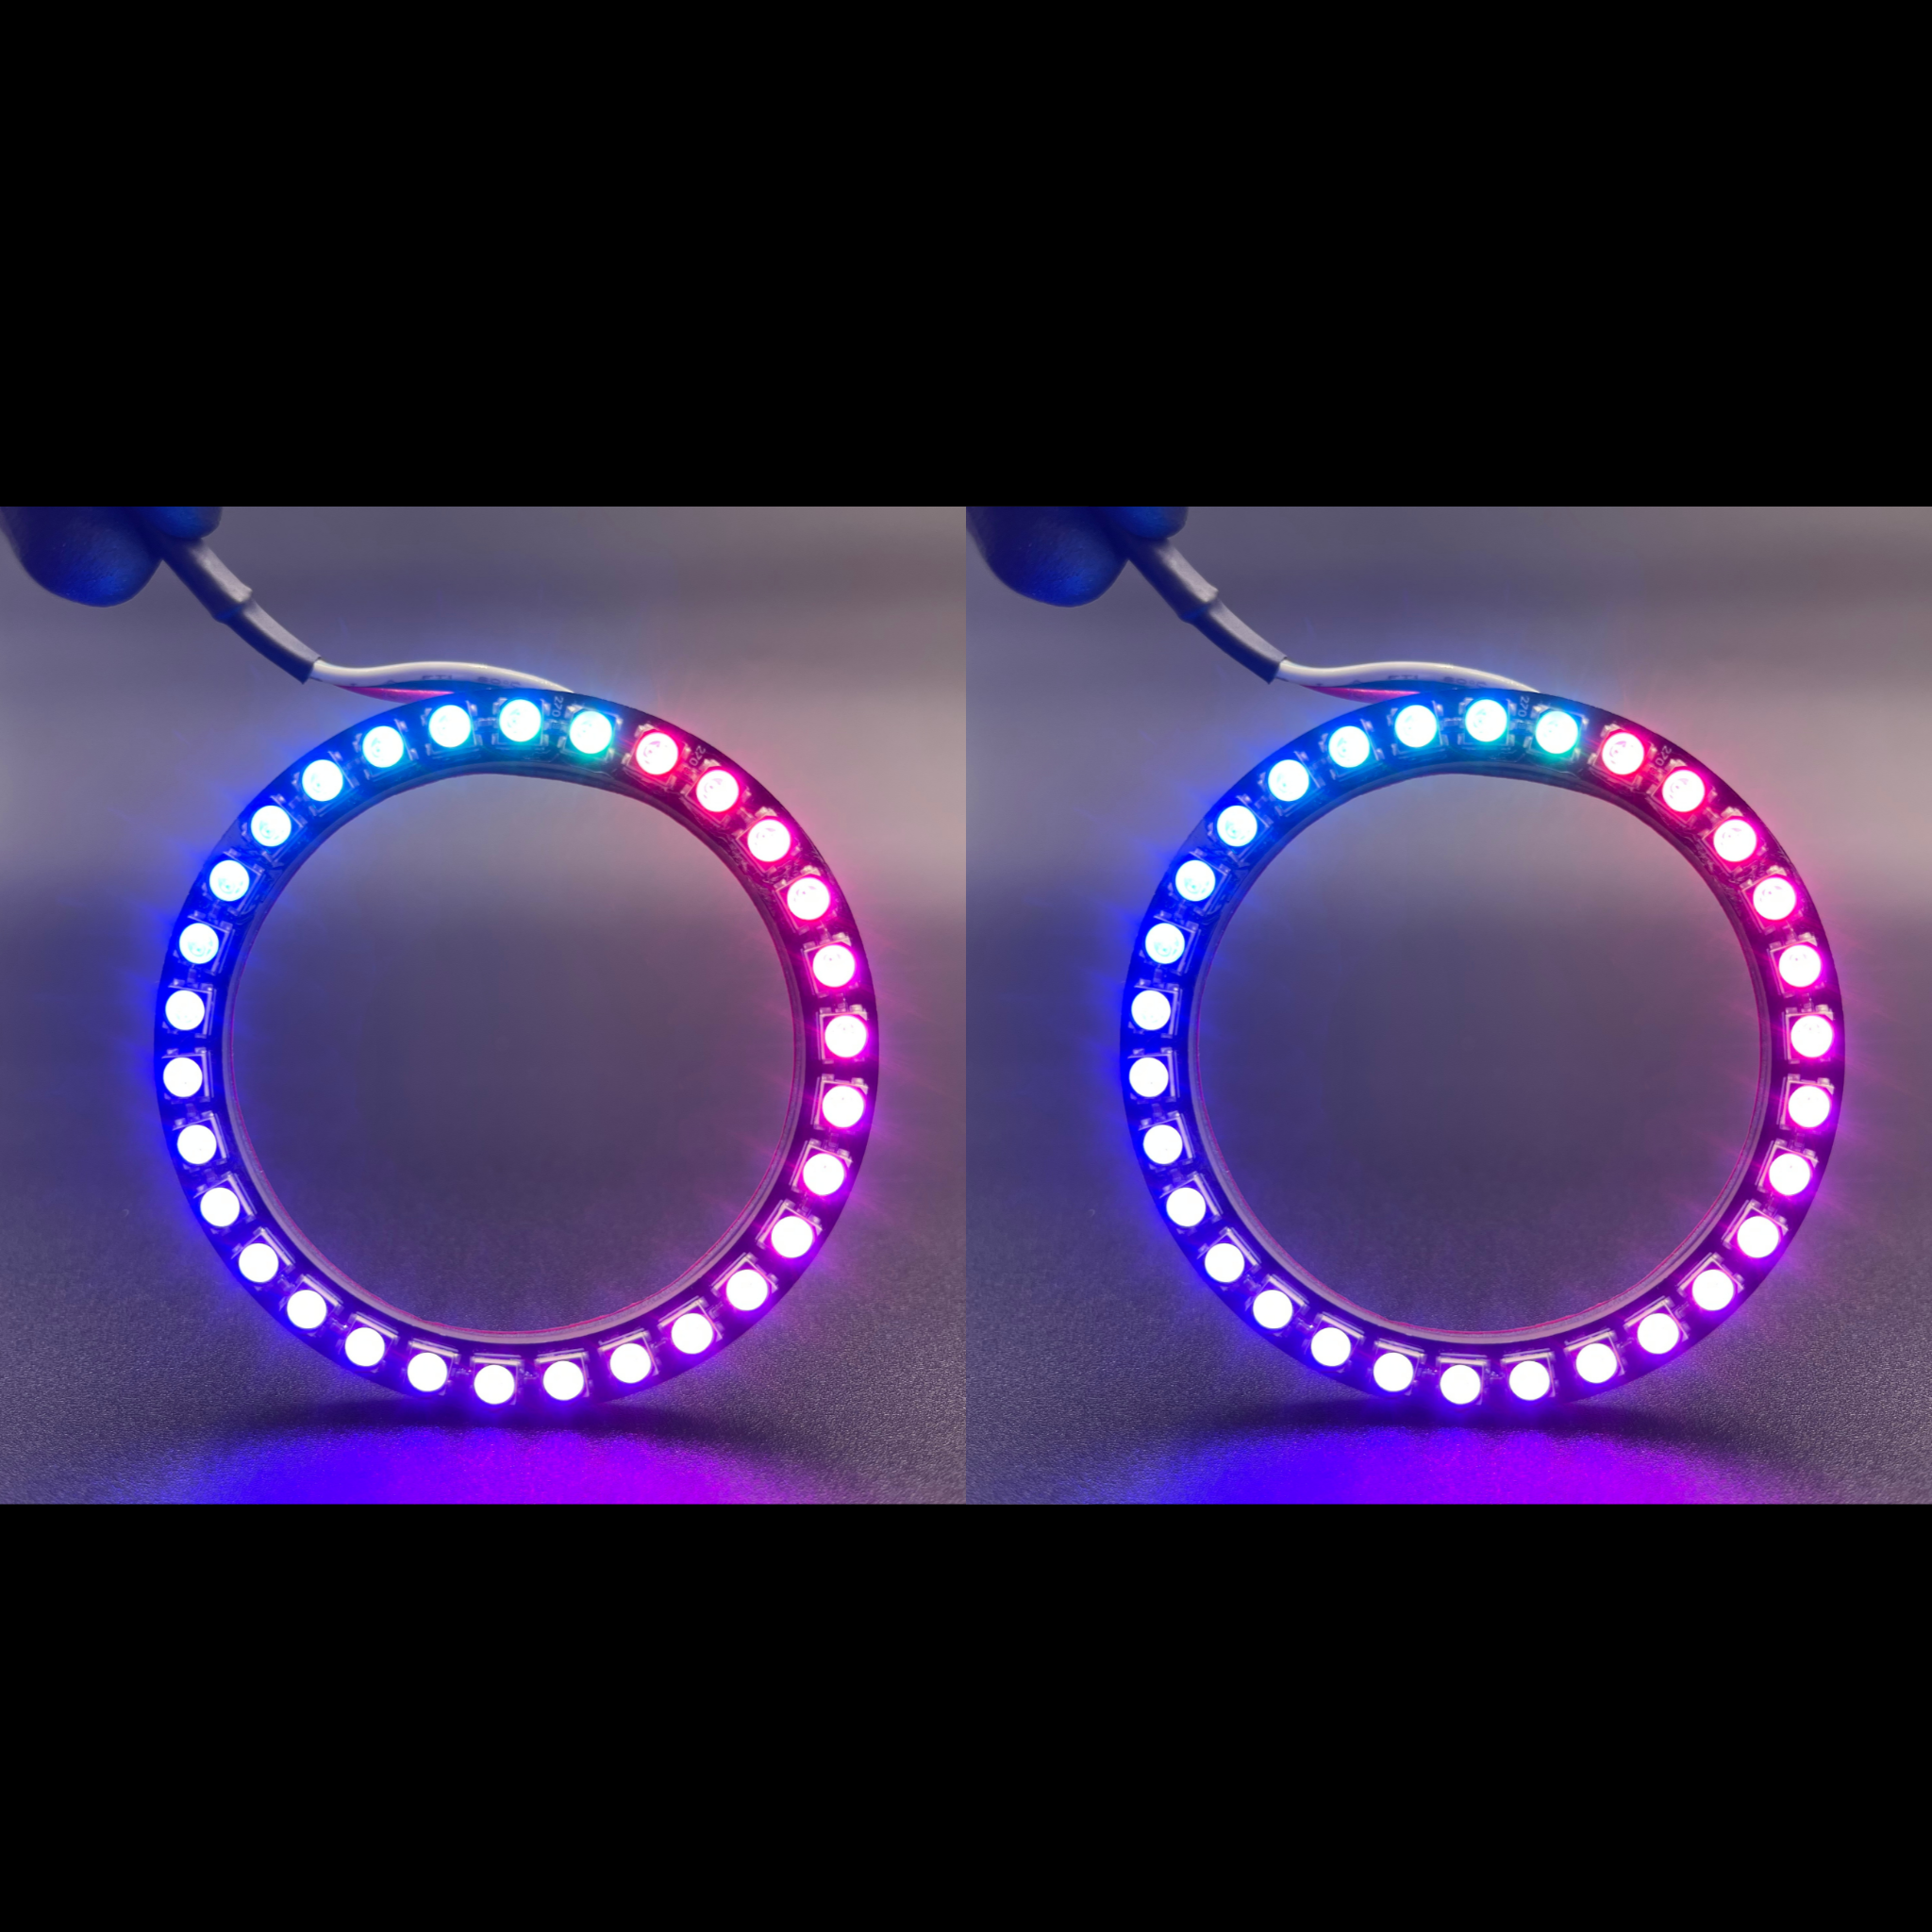 2005-2007 Ford 500 Multicolor Halo Kit - RGB Halo Kits Multicolor Flow Series Color Chasing RGBWA LED headlight kit Colorshift Oracle Lighting Trendz OneUpLighting Morimoto theretrofitsource AutoLEDTech Diode Dynamics